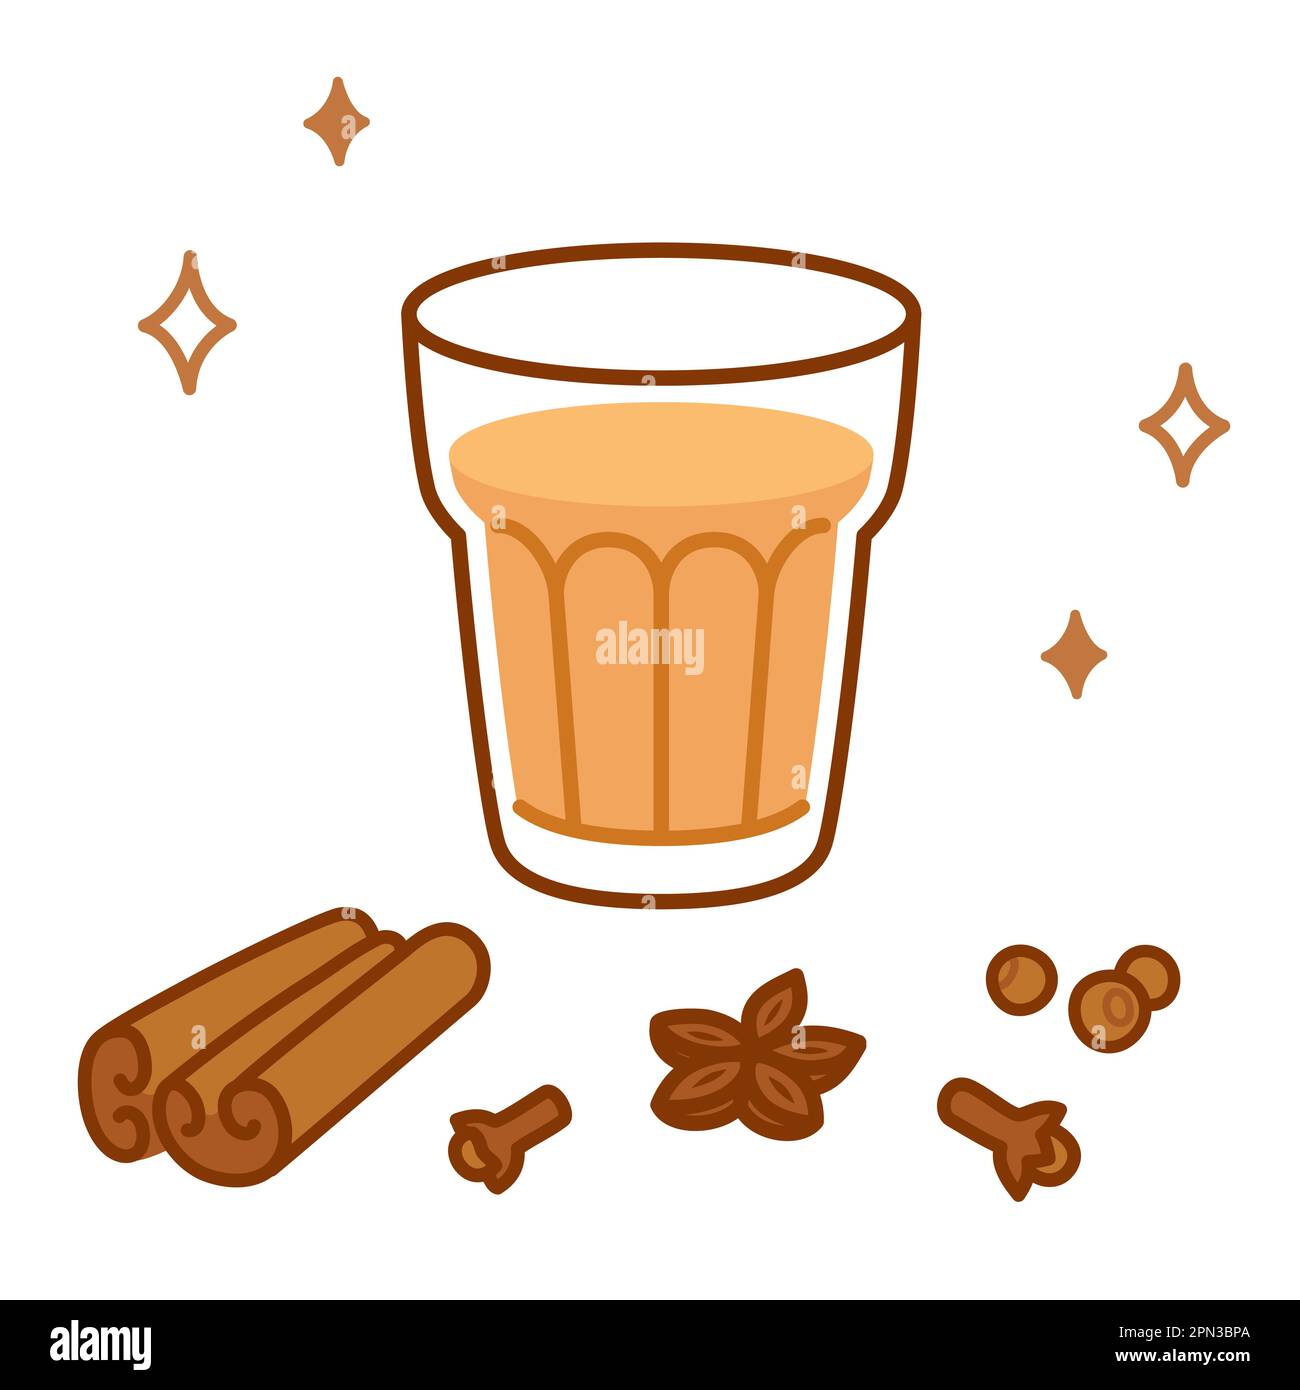 Masala chai tea doodle drawing. Hand drawn cartoon glass of Indian tea with aromatic spices: cinnamon, cloves, anise and pepper. Vector illustration. Stock Vector